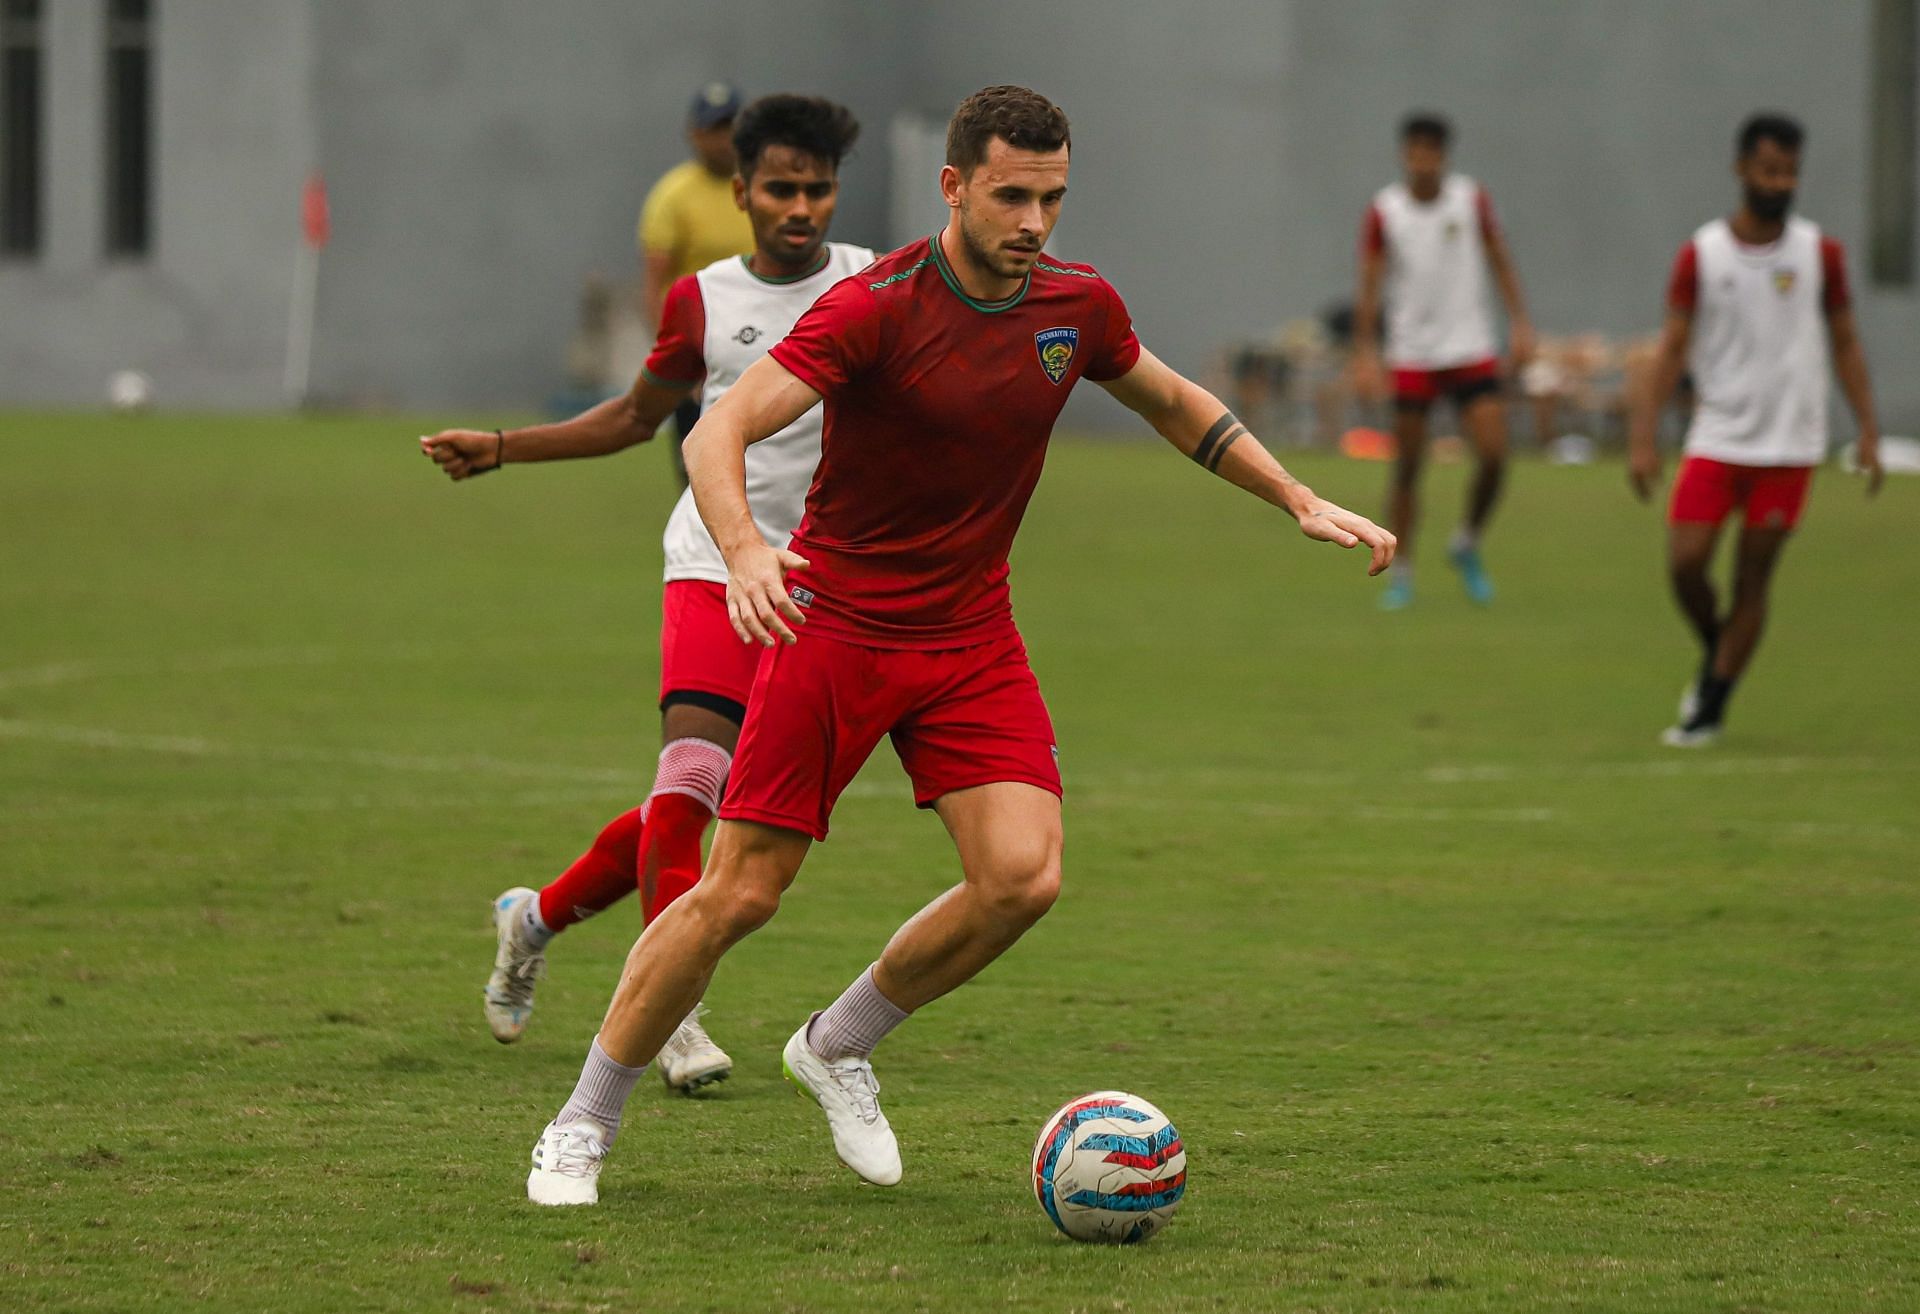 Jordan Murray in action for Chennaiyin FC during a training session. [Credits: CFC Media]